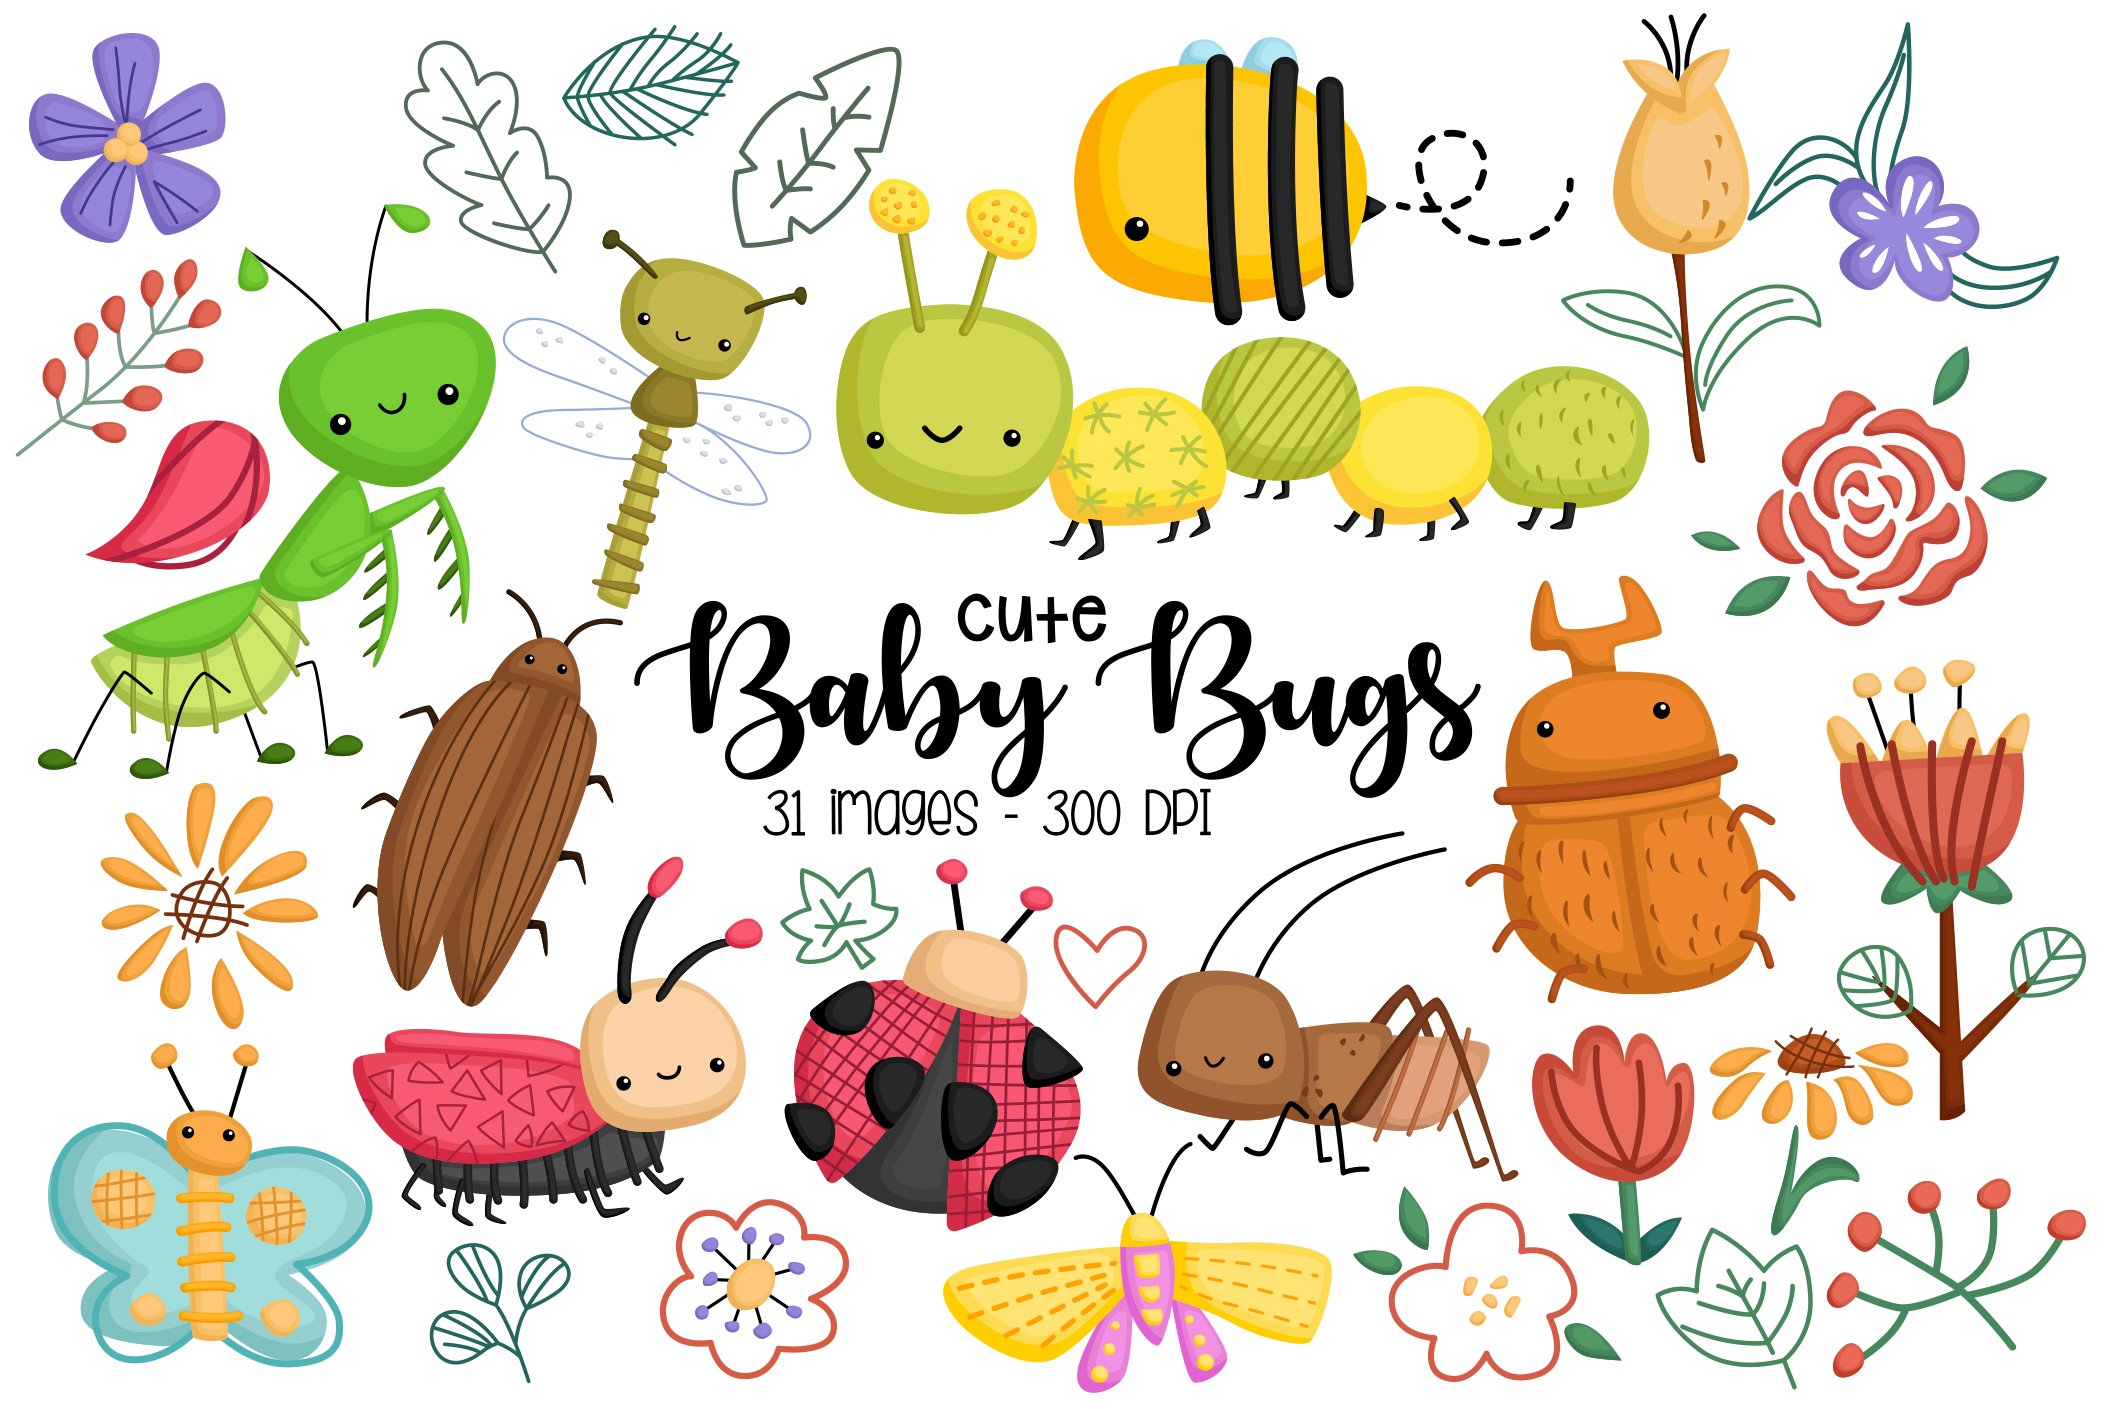 Baby Bug Clipart - Cute Bugs Types cover image.